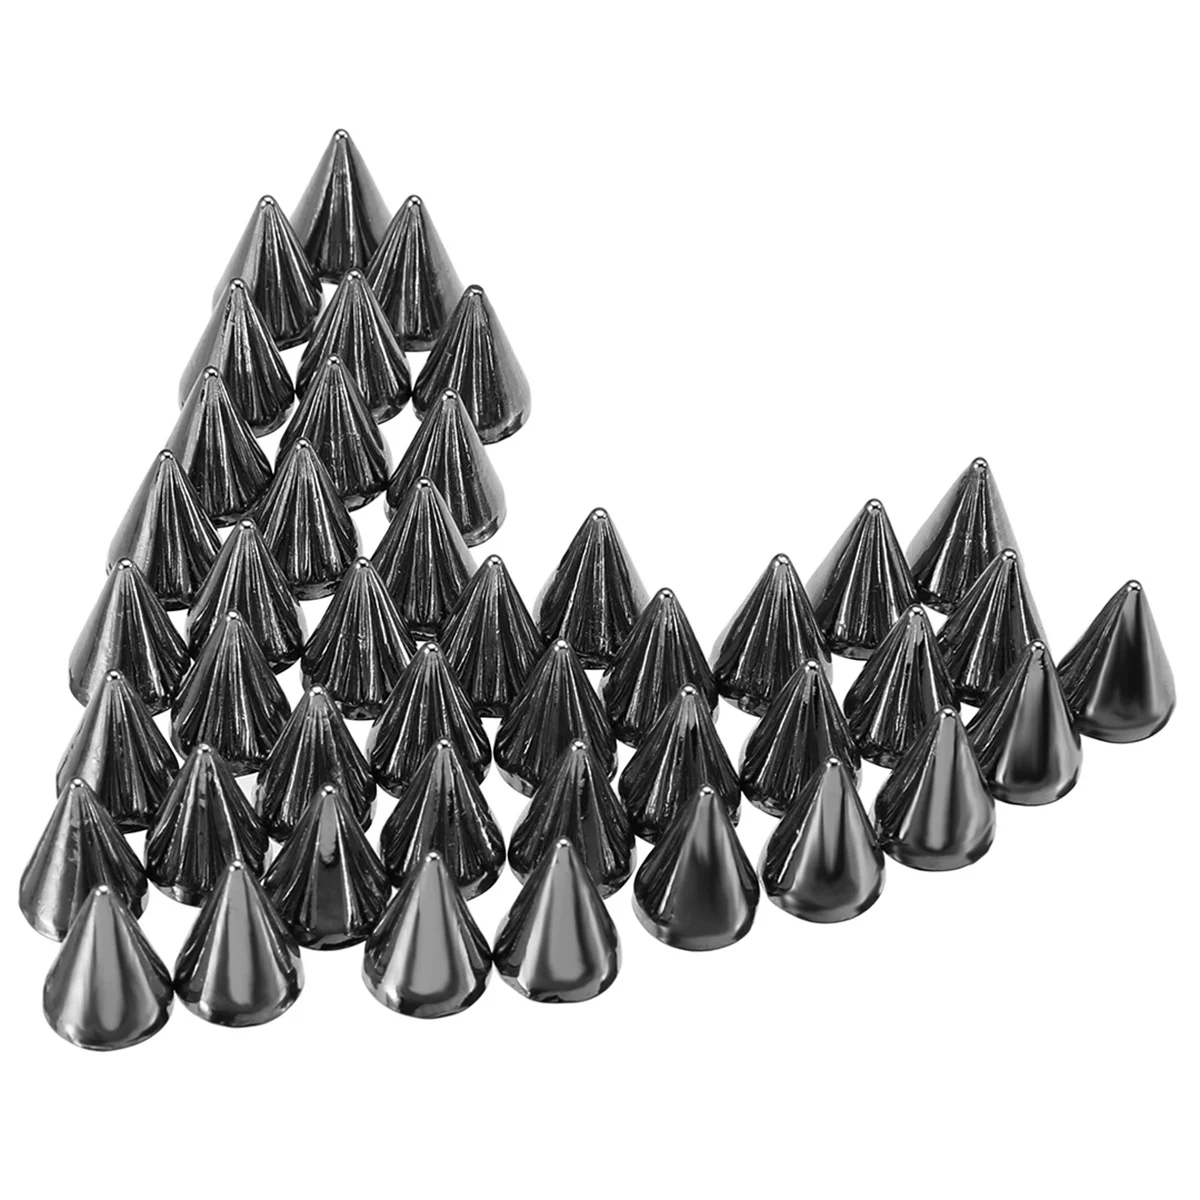 100pcs/lot Alloy Spikes Cone Studs Rivet Bullet Spikes Cone Screw Studs for Clothes Leathercraft Punk Rock 7x10mm